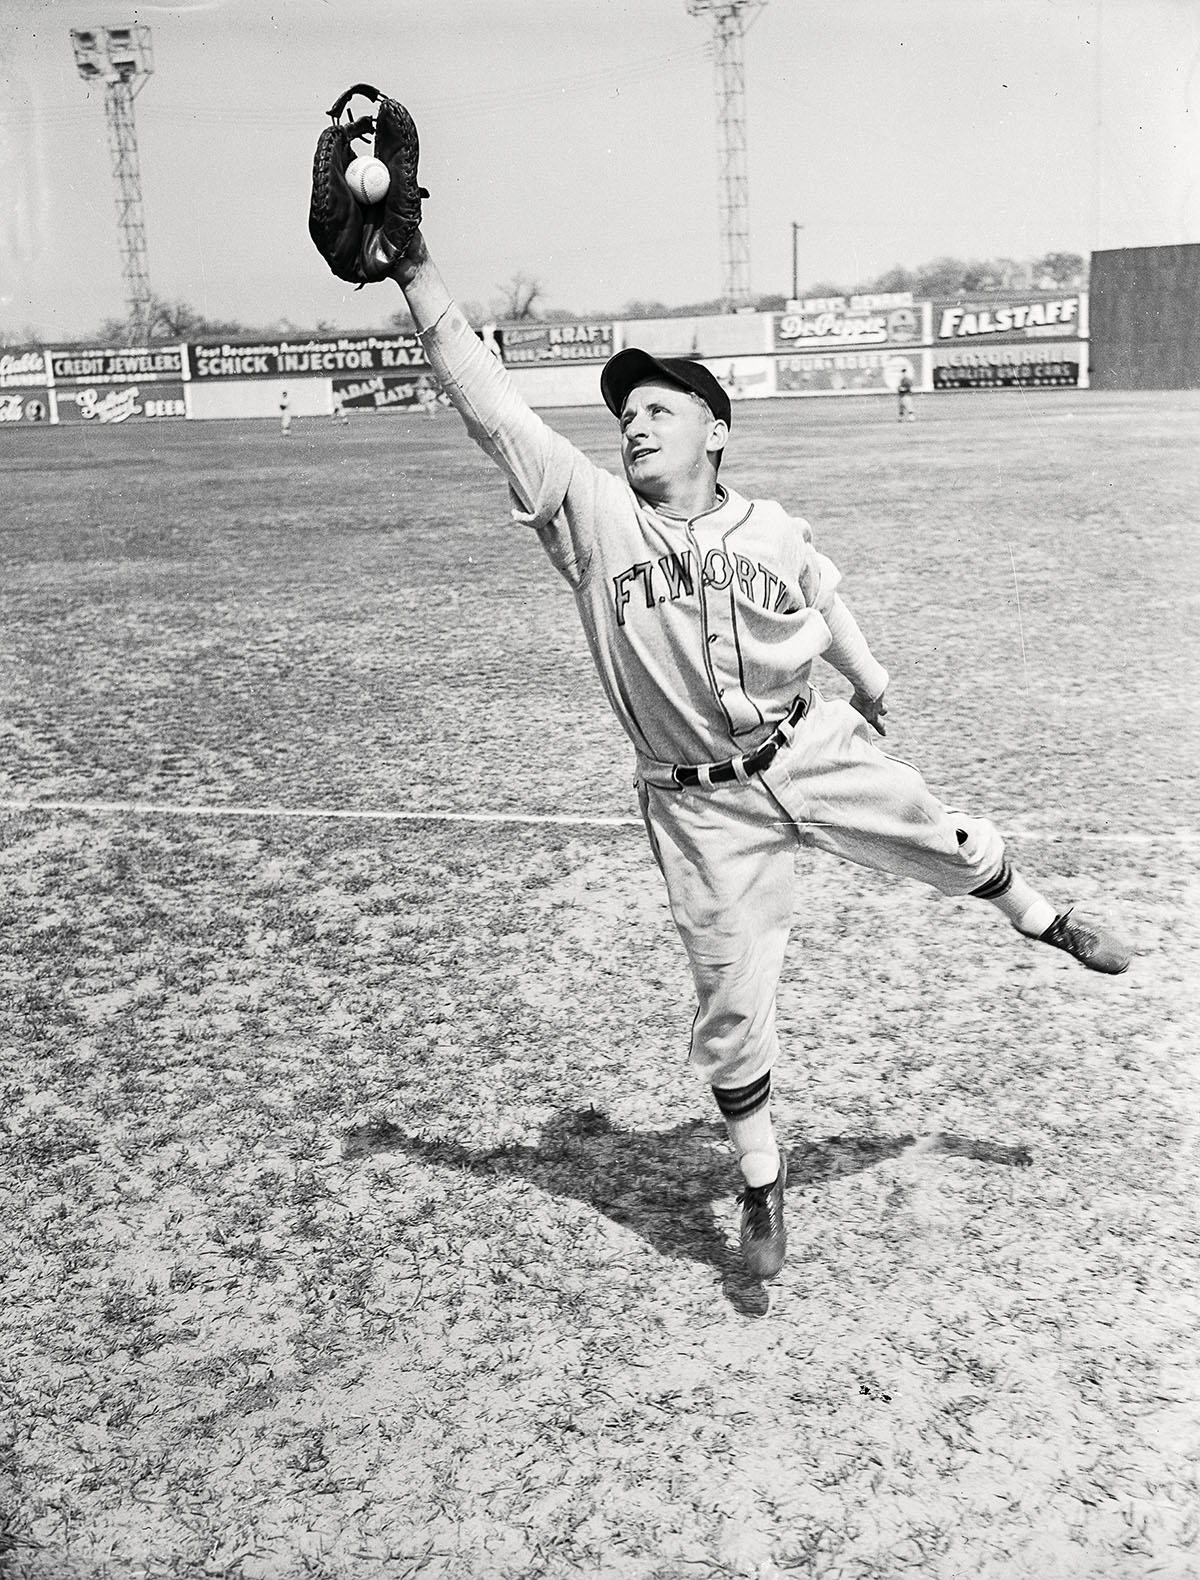 A man catches a baseball while playing for the Fort Worth Cats in 1940